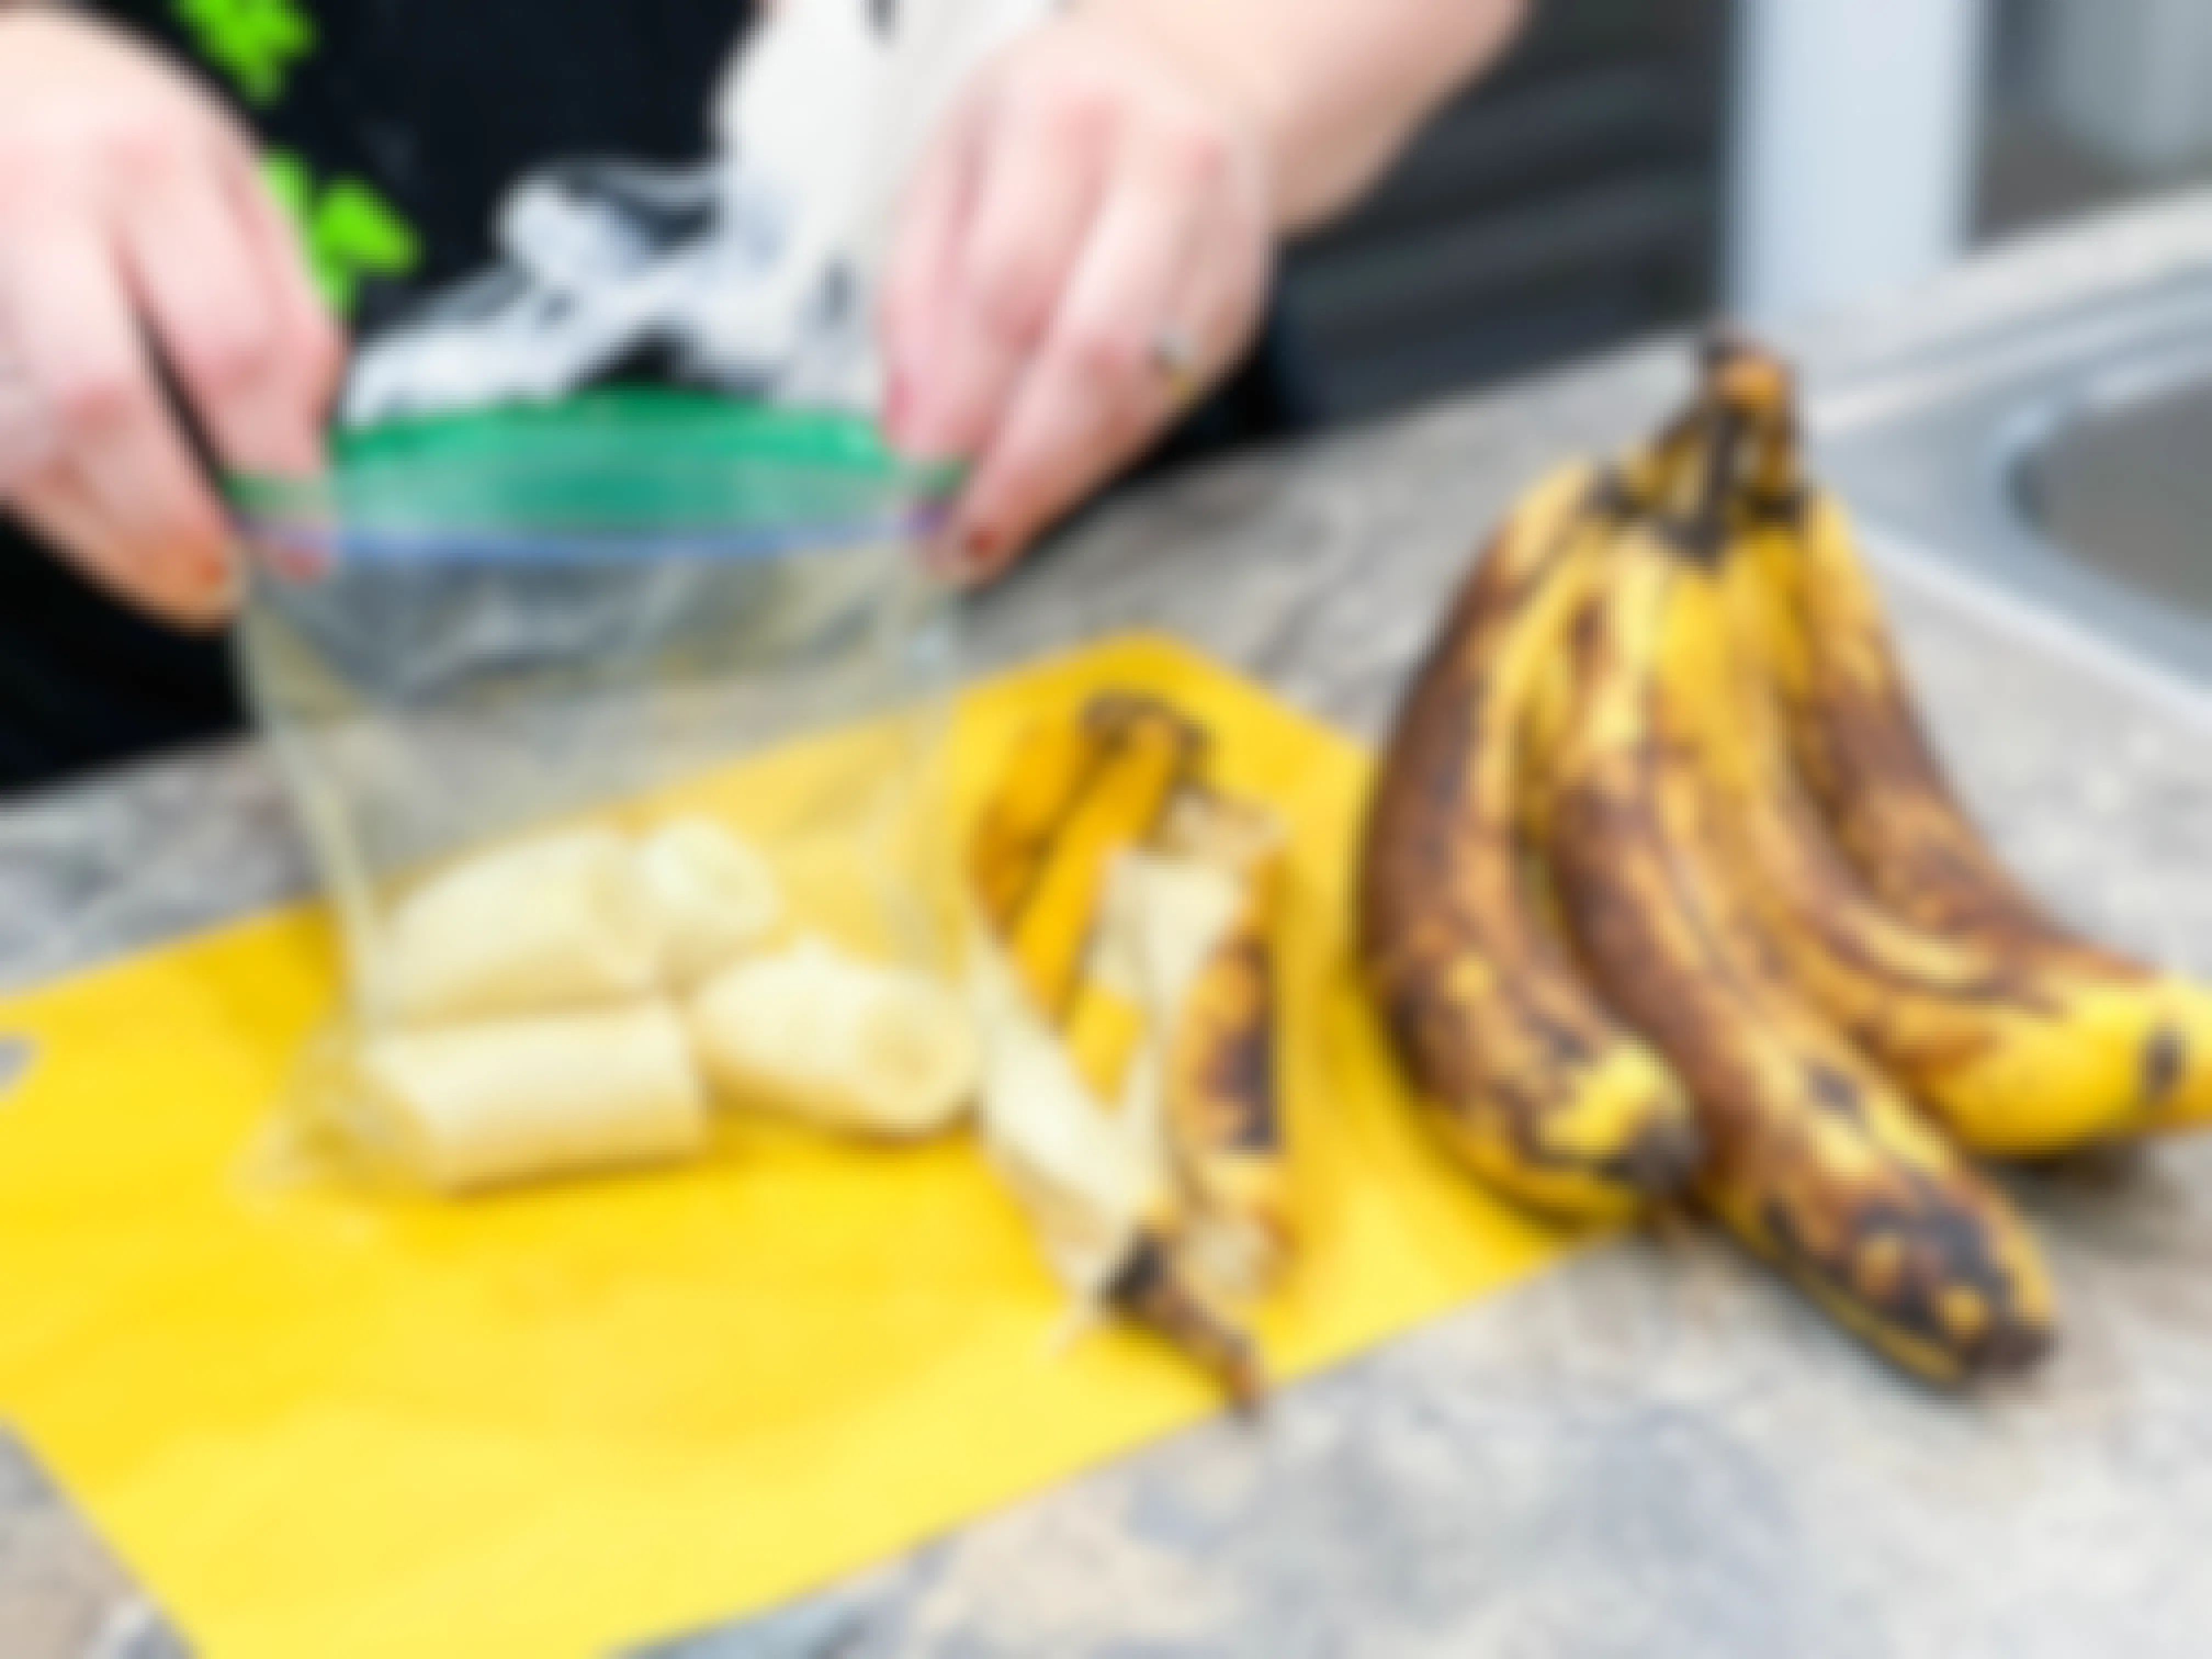 brown banana pieces being put in sandwich bag